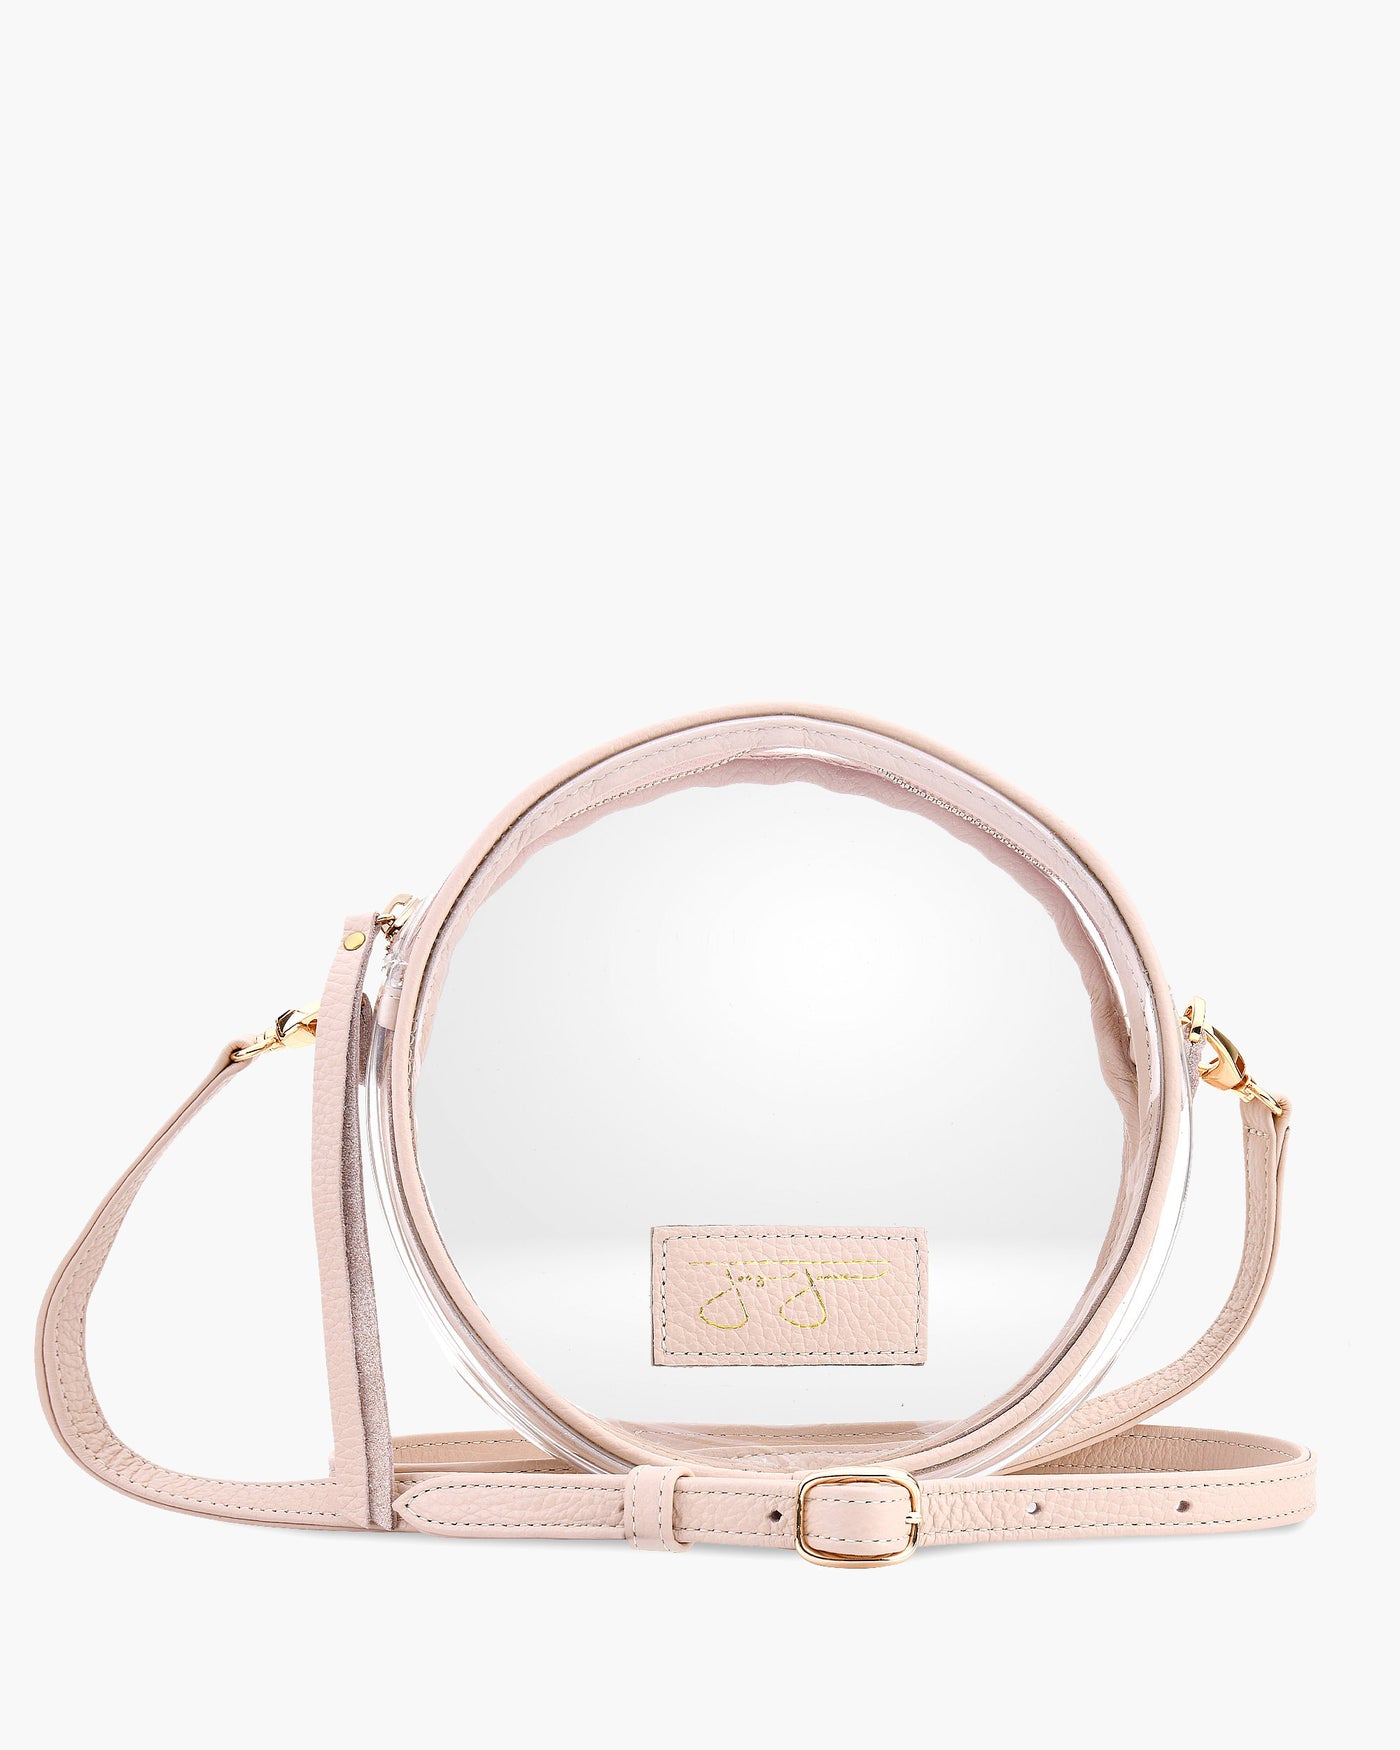 Isabelle Clear Circle Bag - Blush Isabelle Clear Bag Joey James, The Label   